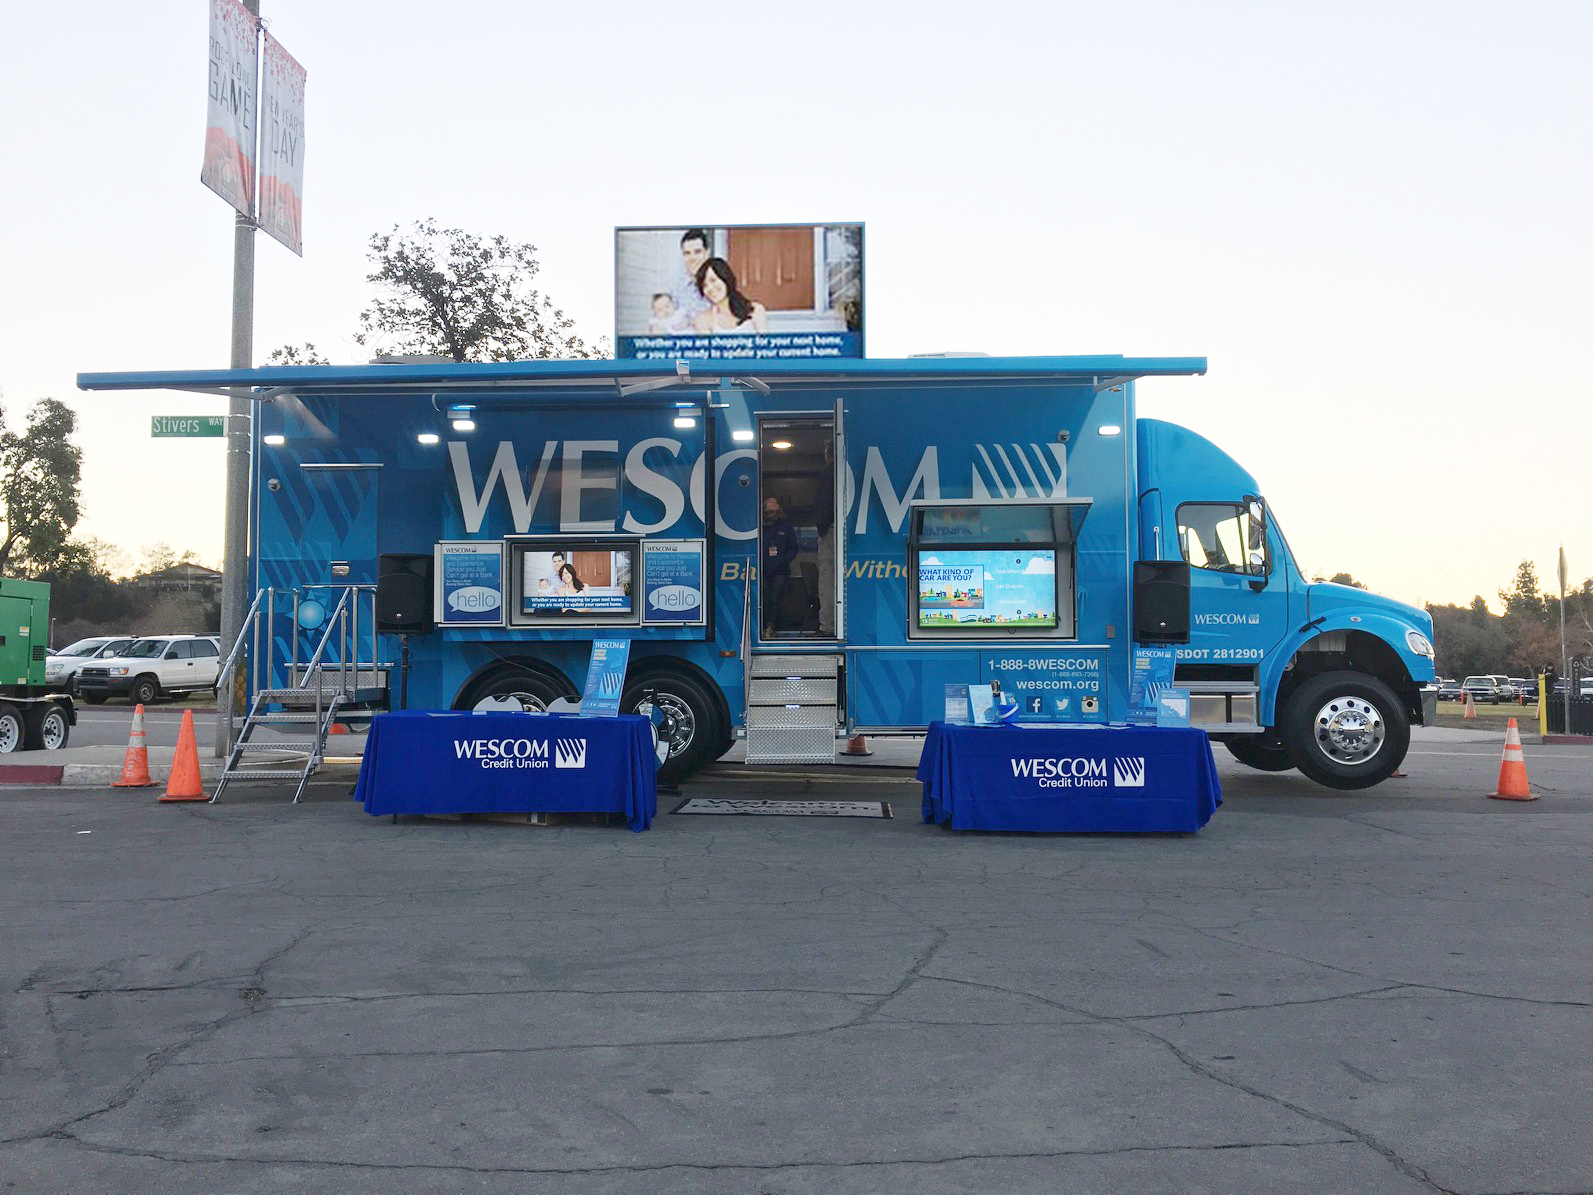 Electro-Matic Provides MBF Industries Mobile Trucks with LED Displays